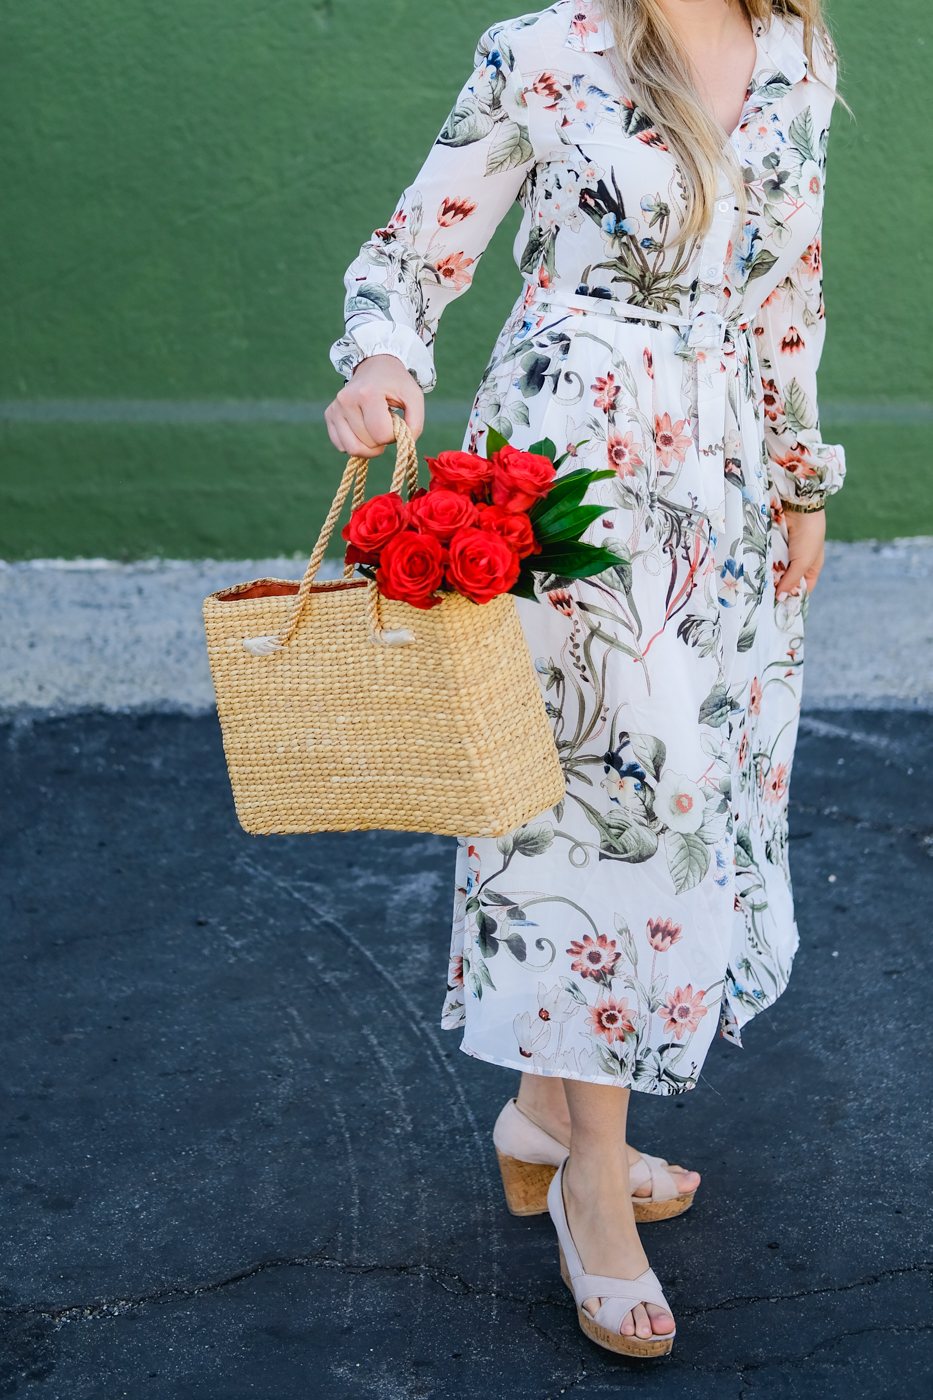 Calico Print Shirt Dress With Self Tie, straw bag with flowers